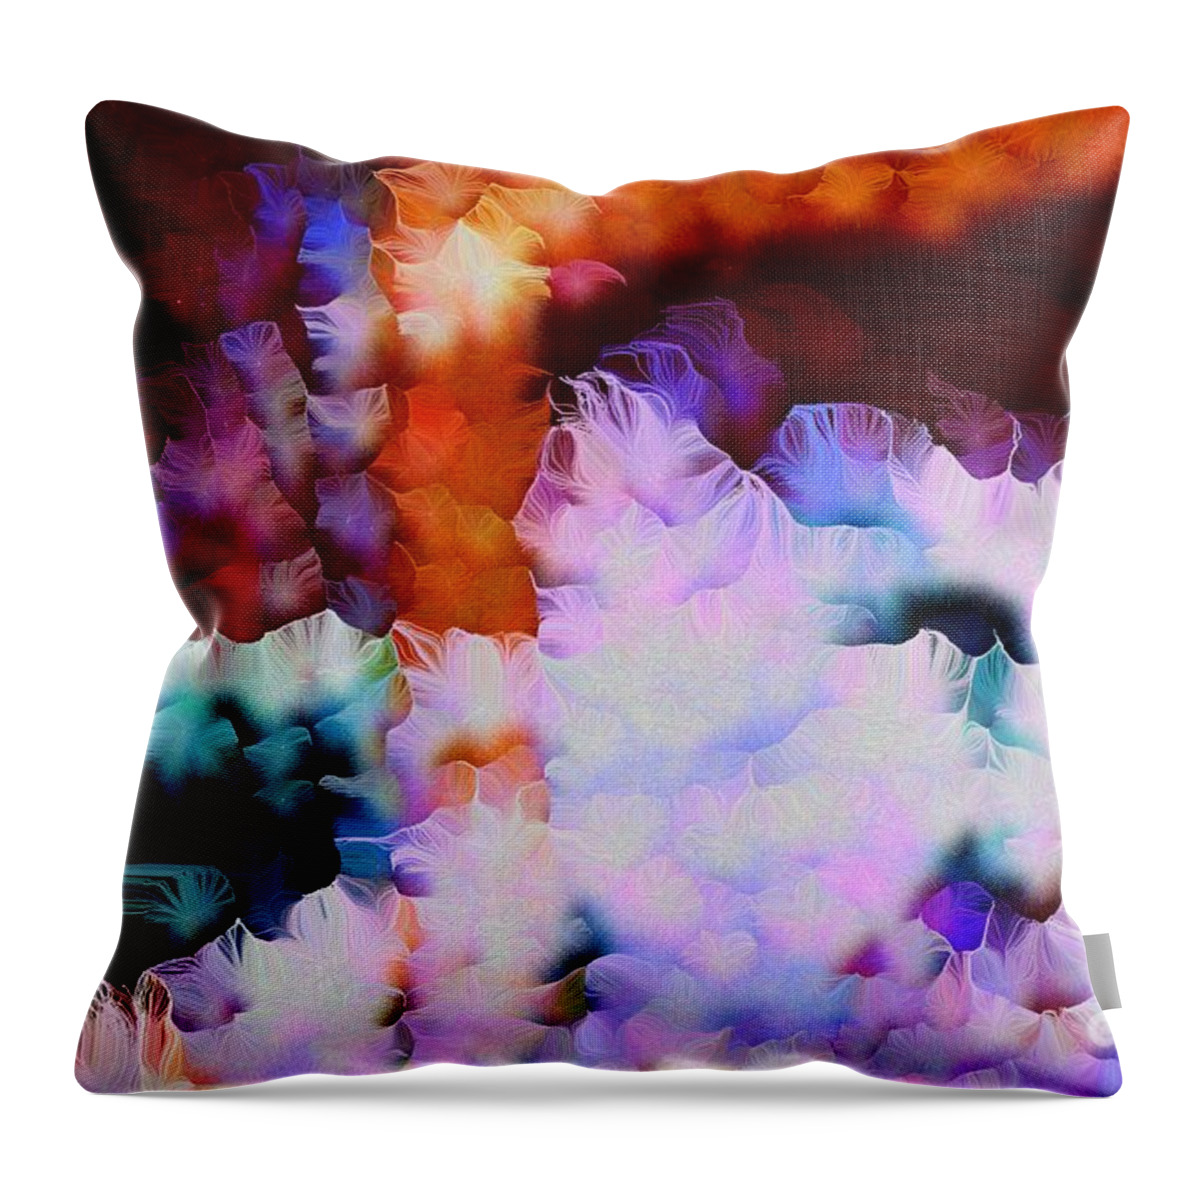 Populations Throw Pillow featuring the mixed media Battle Against the COVID-19 Curve by Aberjhani